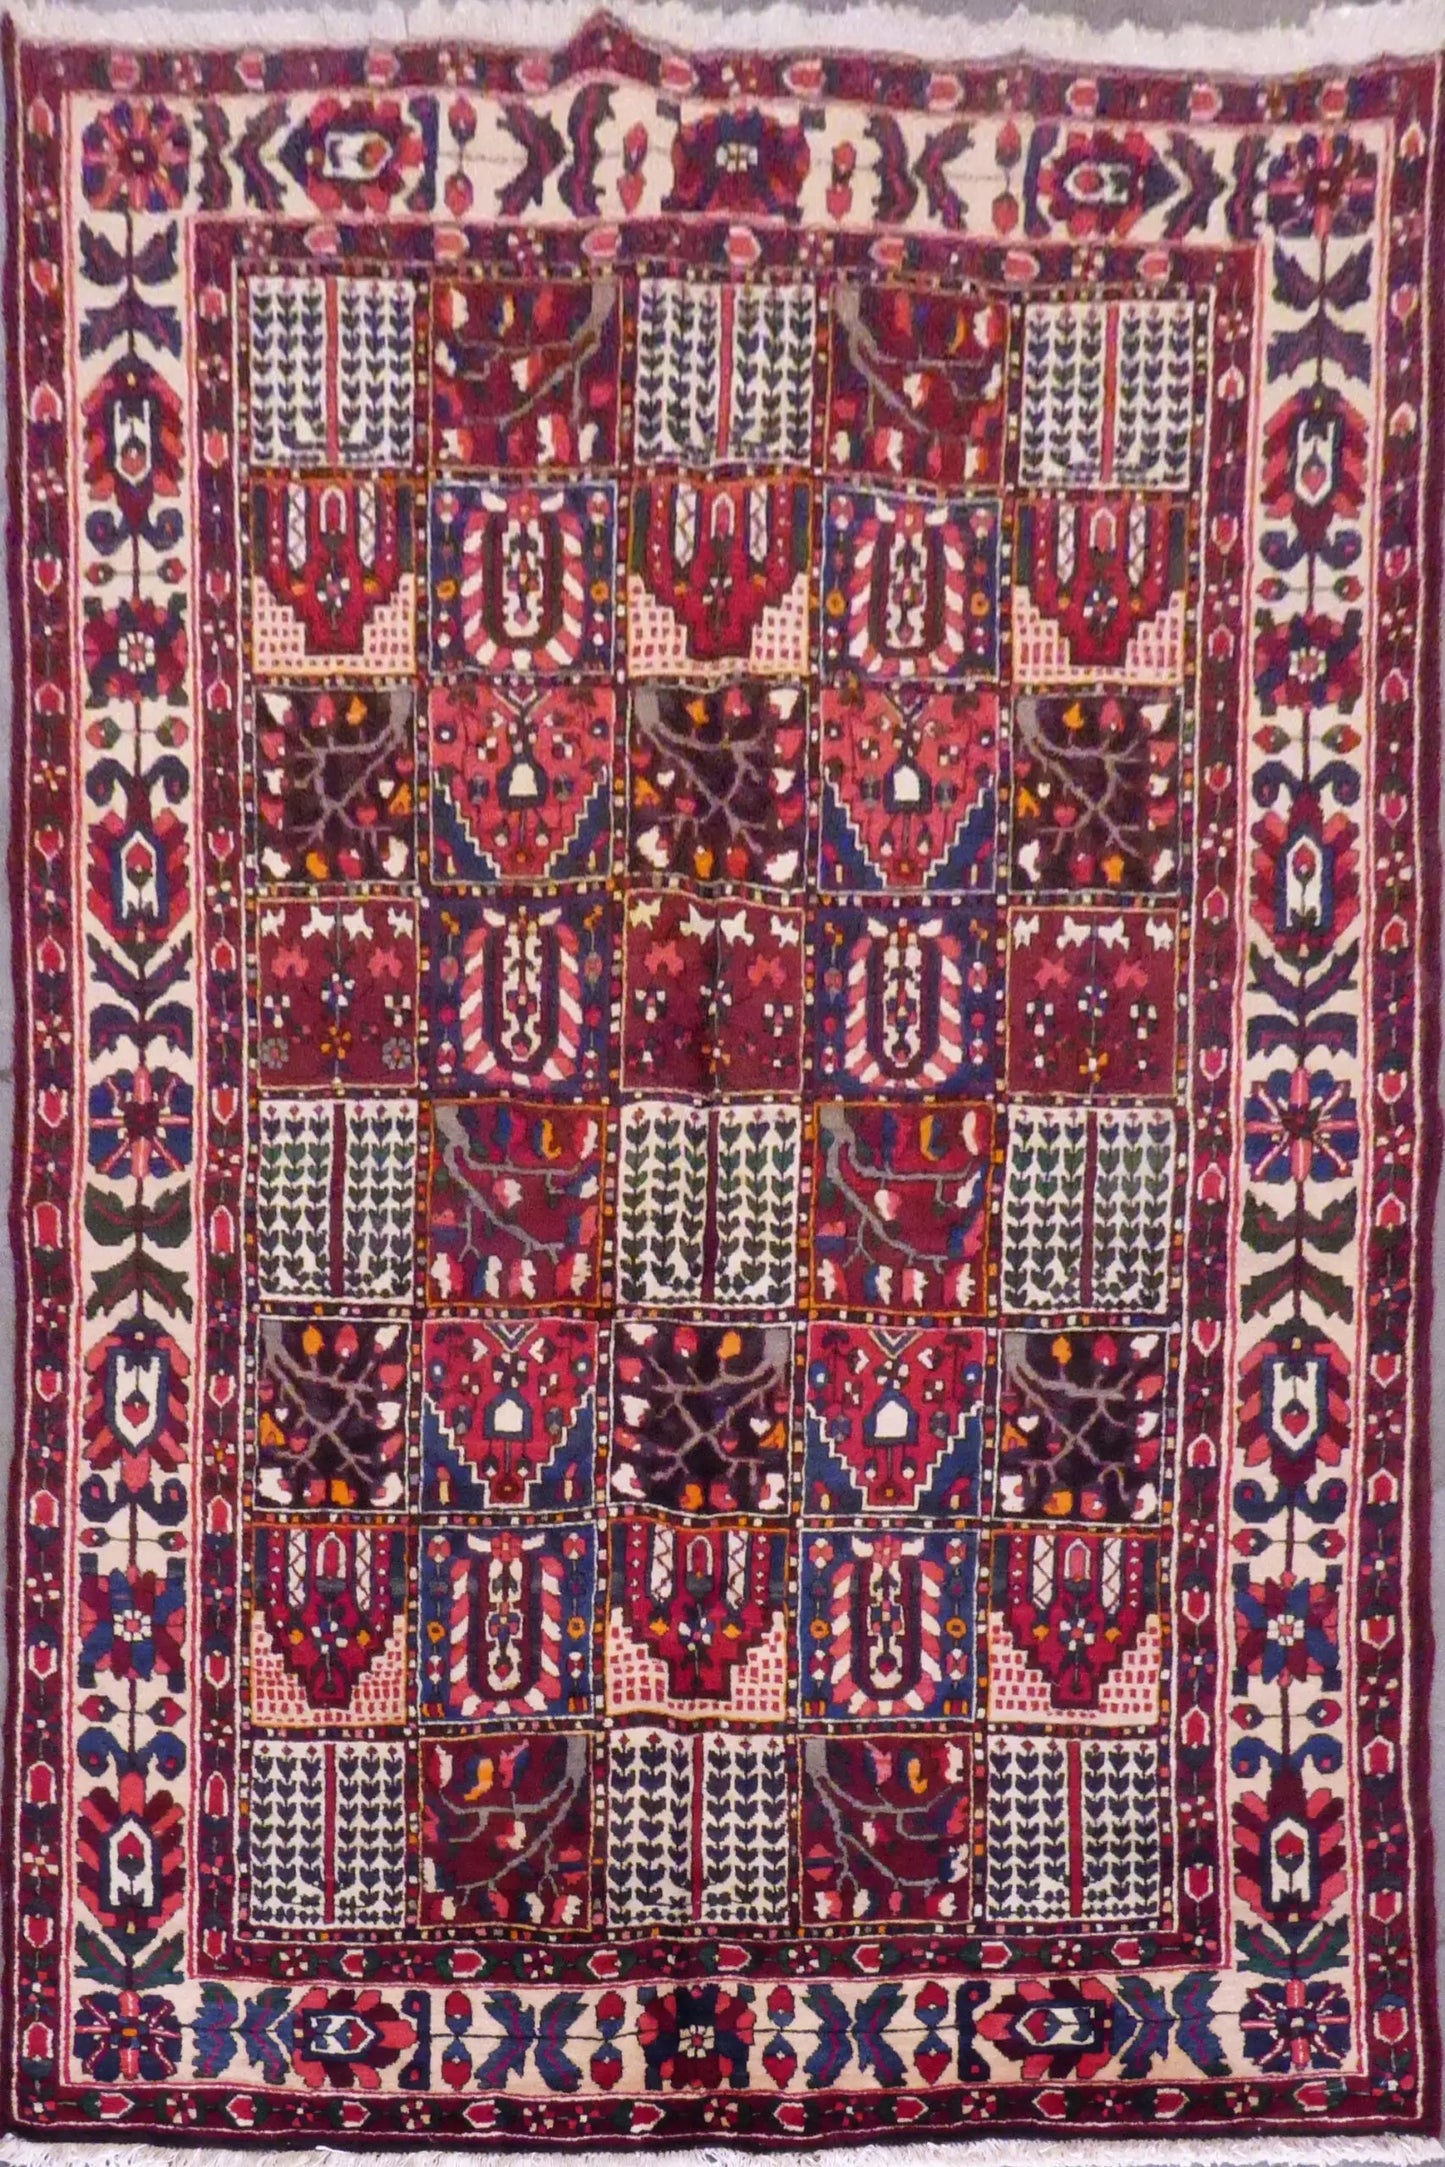 Hand-Knotted Vintage Rug 10"2' x 6"9'